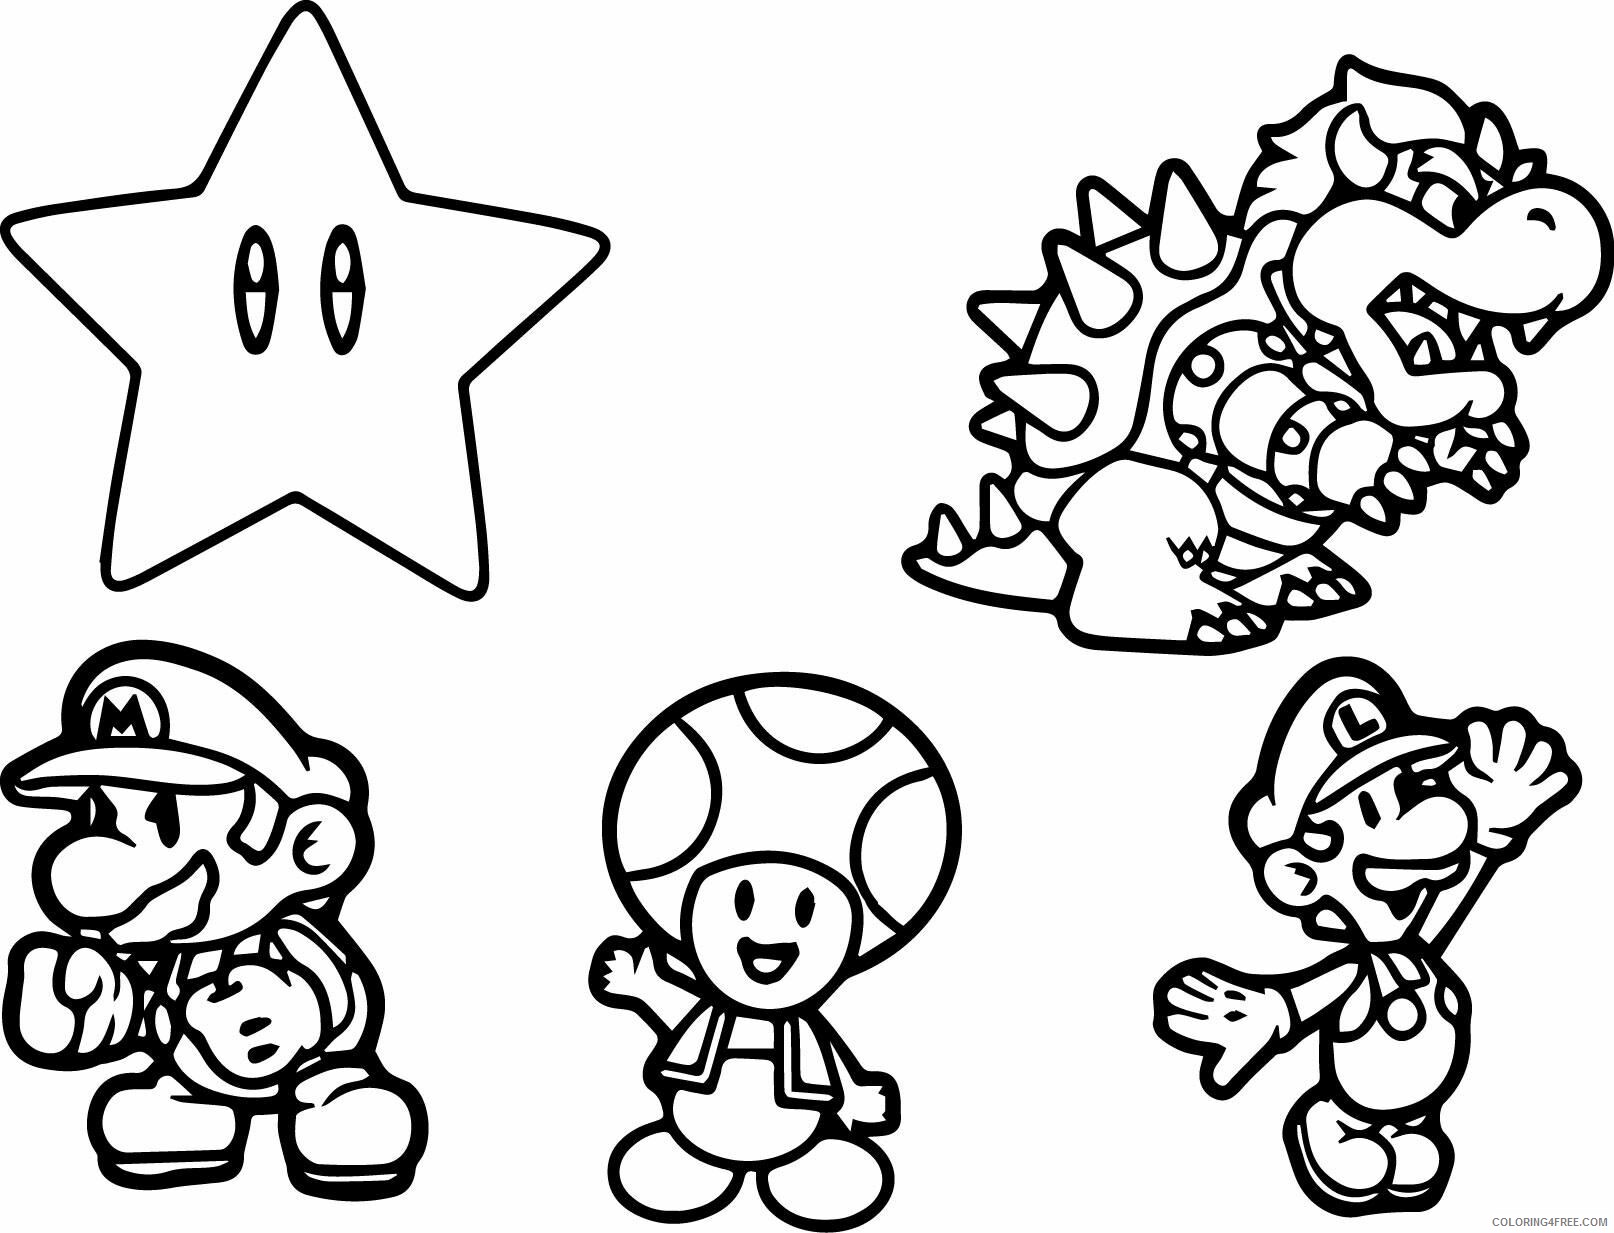 All Mario Character Coloring Pages Printable Sheets Mario Characters Coloring 2021 a 4164 Coloring4free